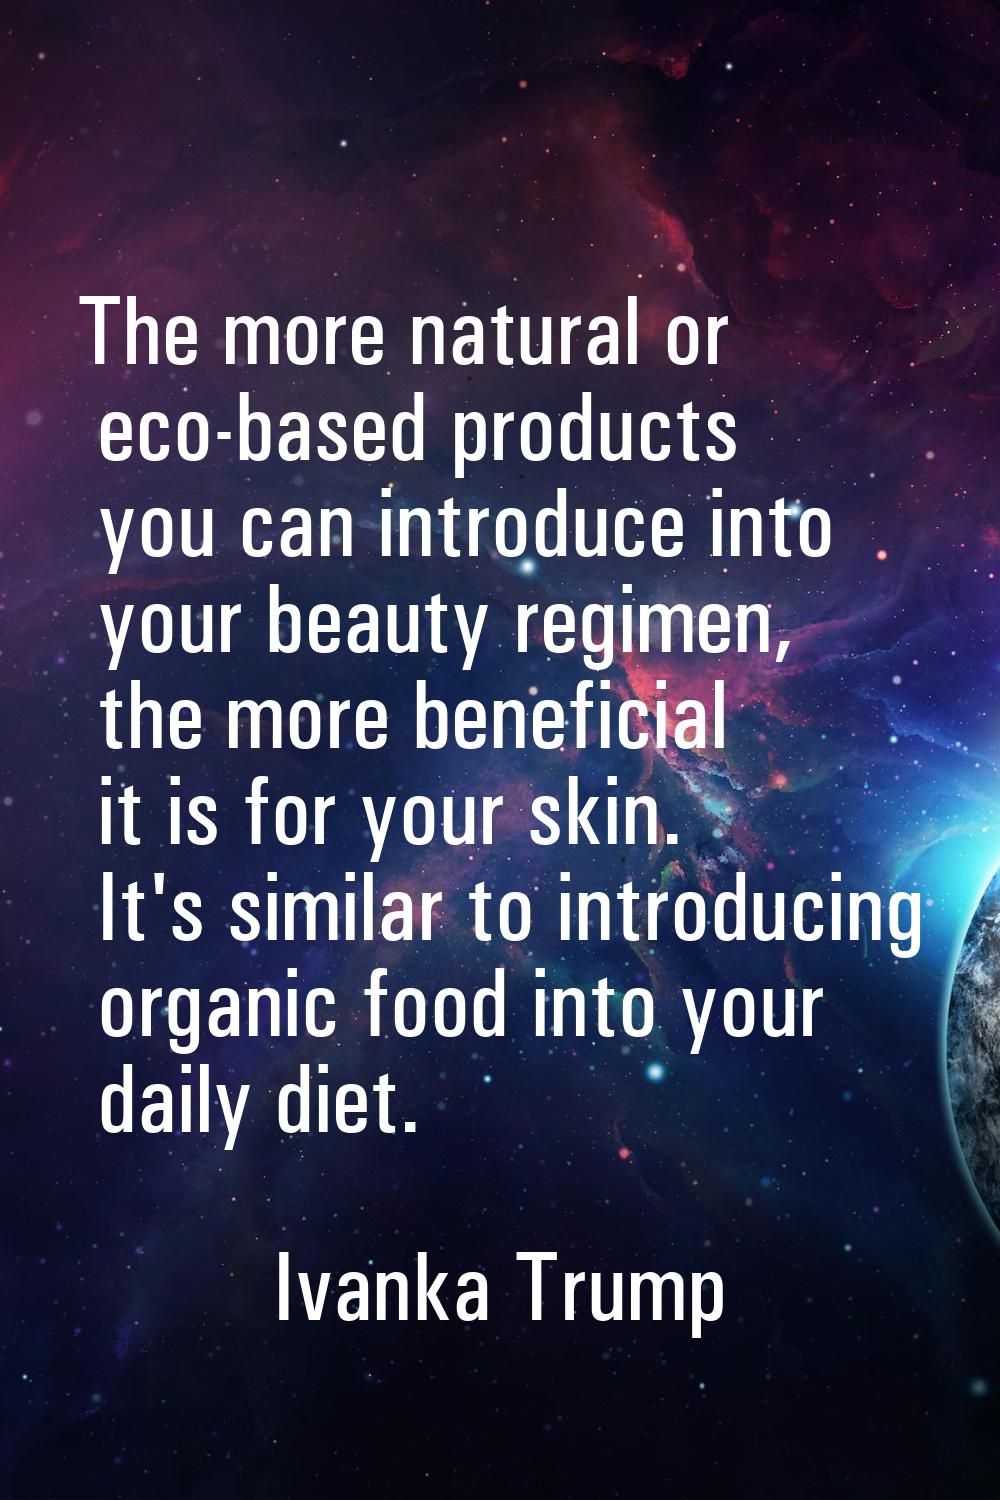 The more natural or eco-based products you can introduce into your beauty regimen, the more benefic